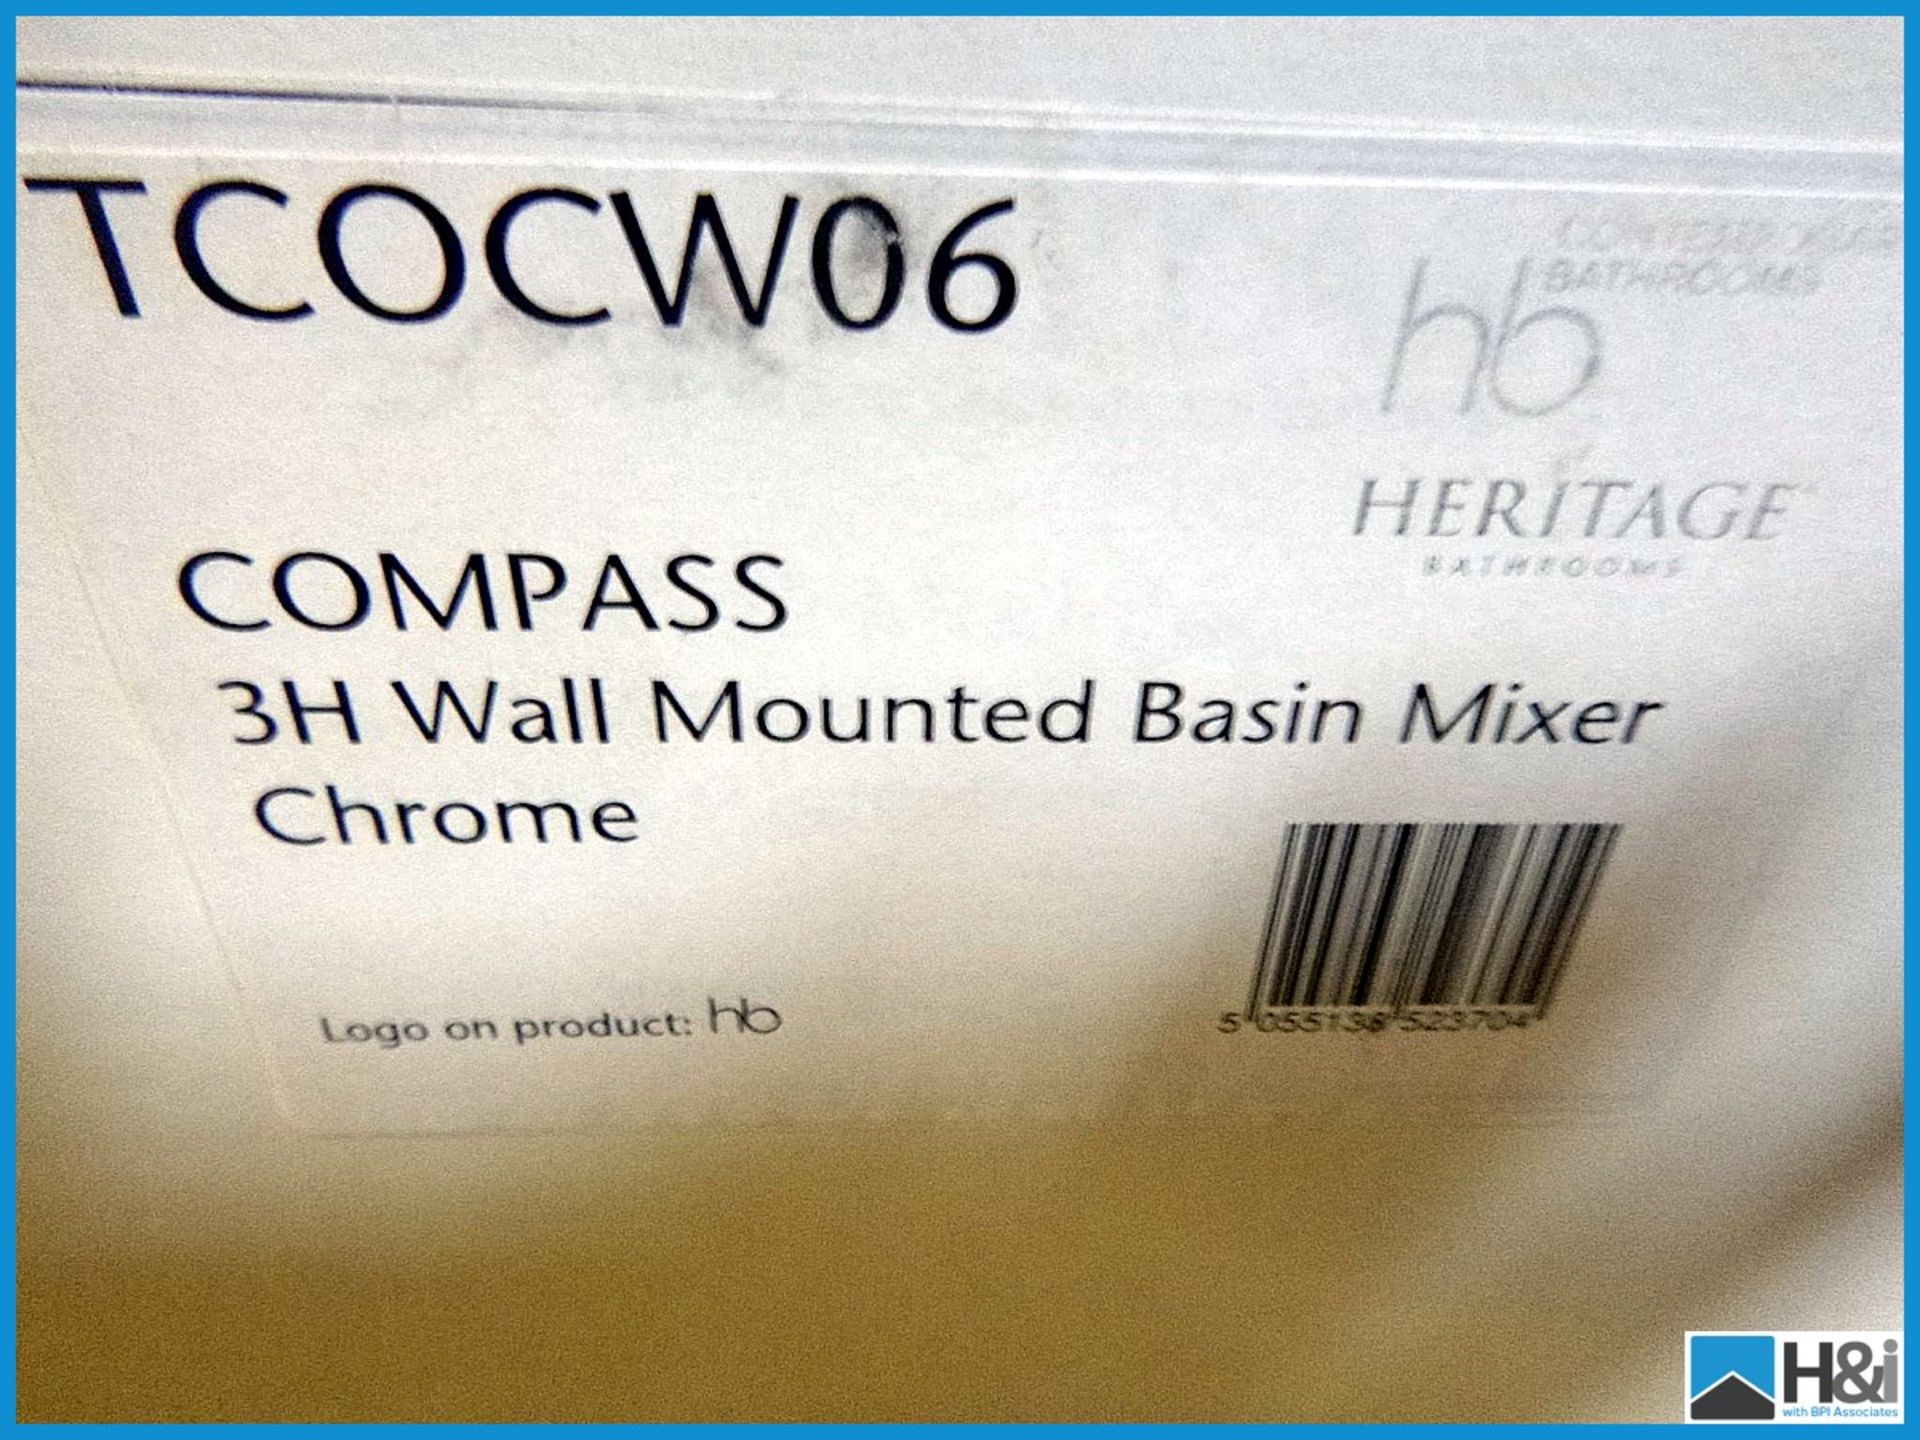 Heritage TC0CW06 Compass Wall Mounted Basin Mixer In Chrome RRP £296 Appraisal: Viewing Essential - Image 3 of 3